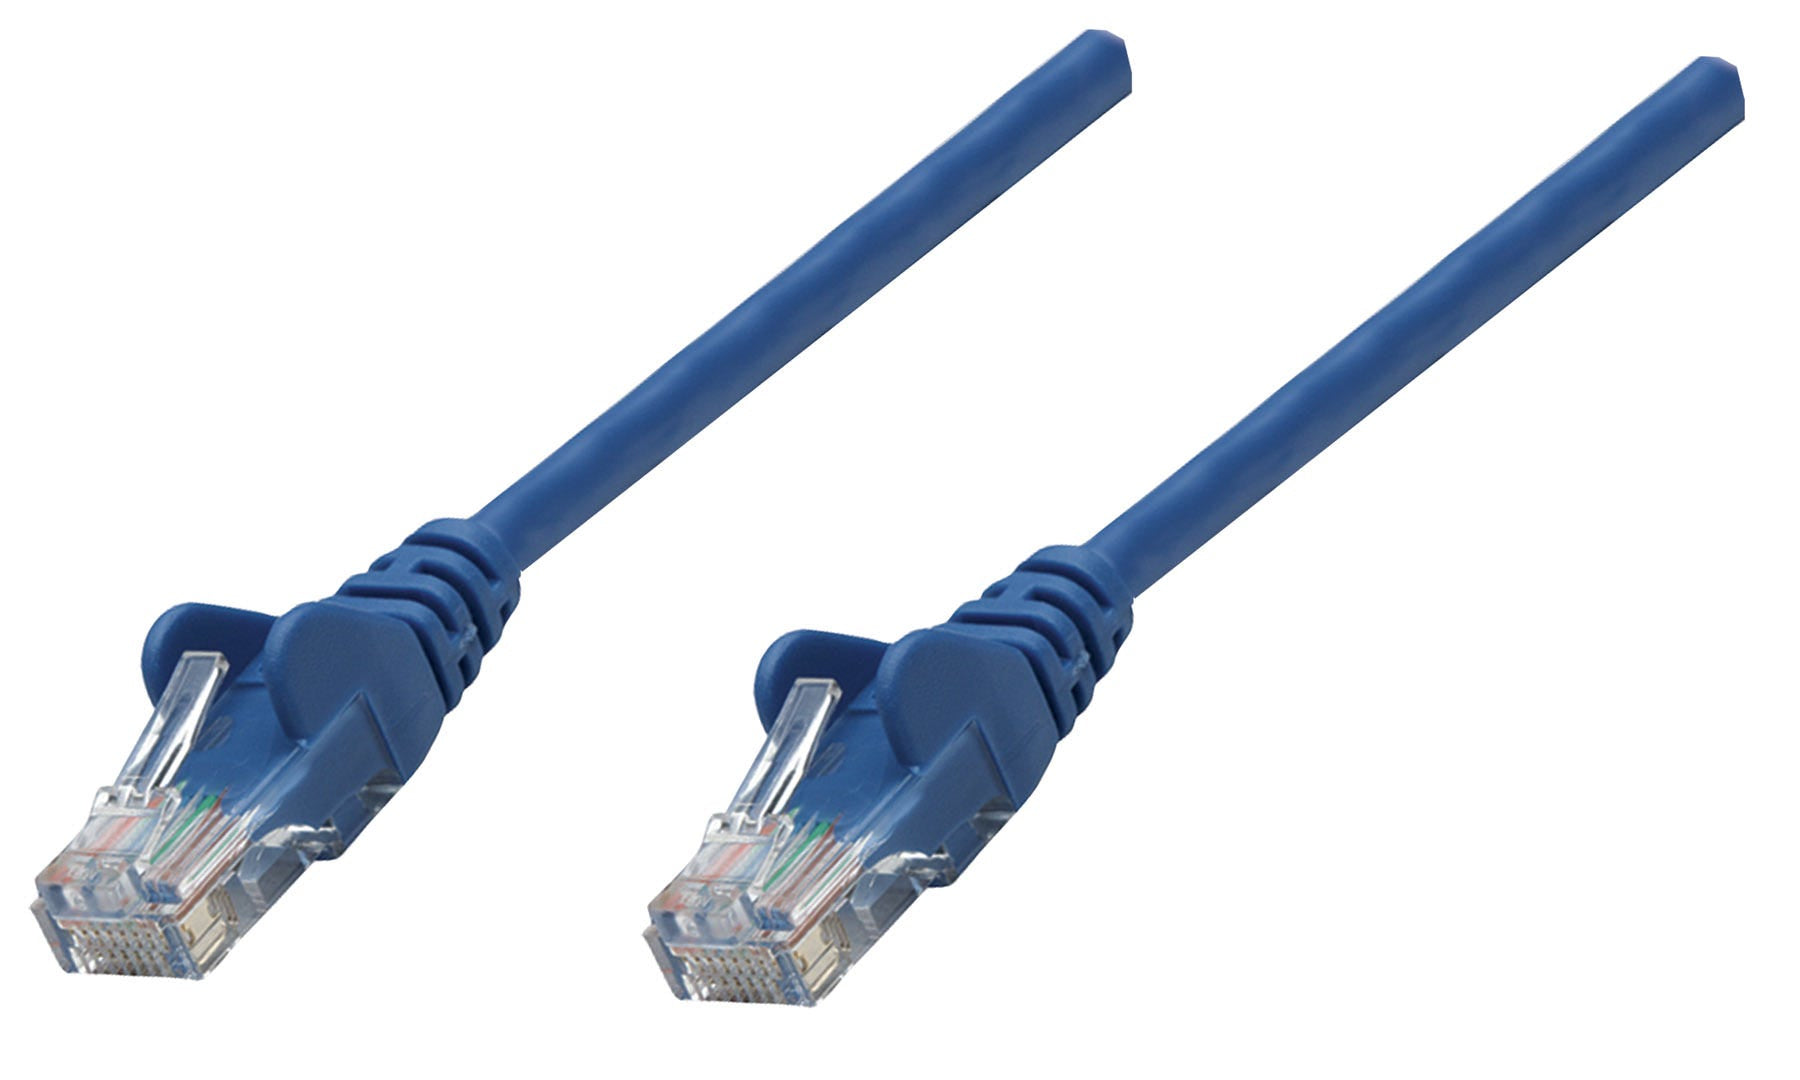 Intellinet Network Patch Cable, Cat6, 0.25m, Blue, Copper, U/UTP, PVC, RJ45, Gold Plated Contacts, Snagless, Booted, Lifetime Warranty, Polybag